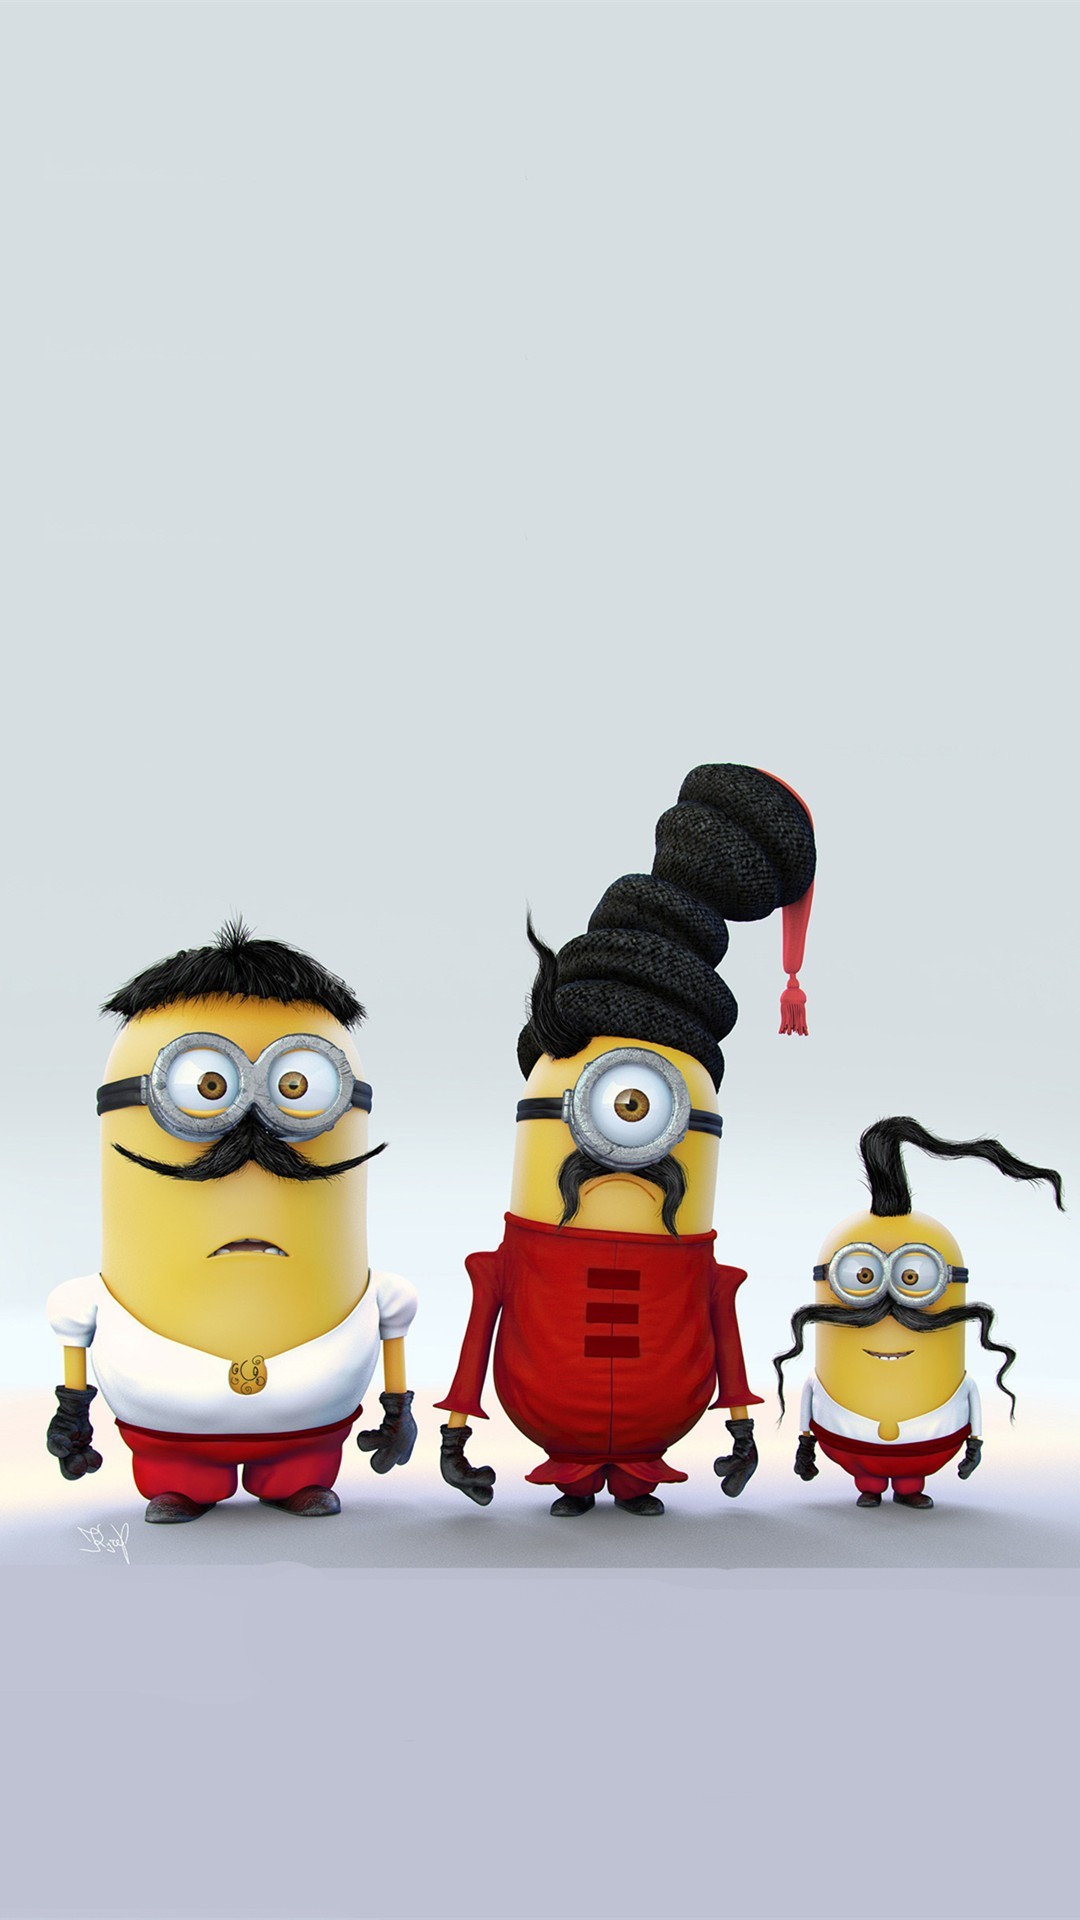 1080x1920 Minions with Mustache Family iPhone 6 Plus Wallpaper - HD, 2014 Halloween,  Despicable Me